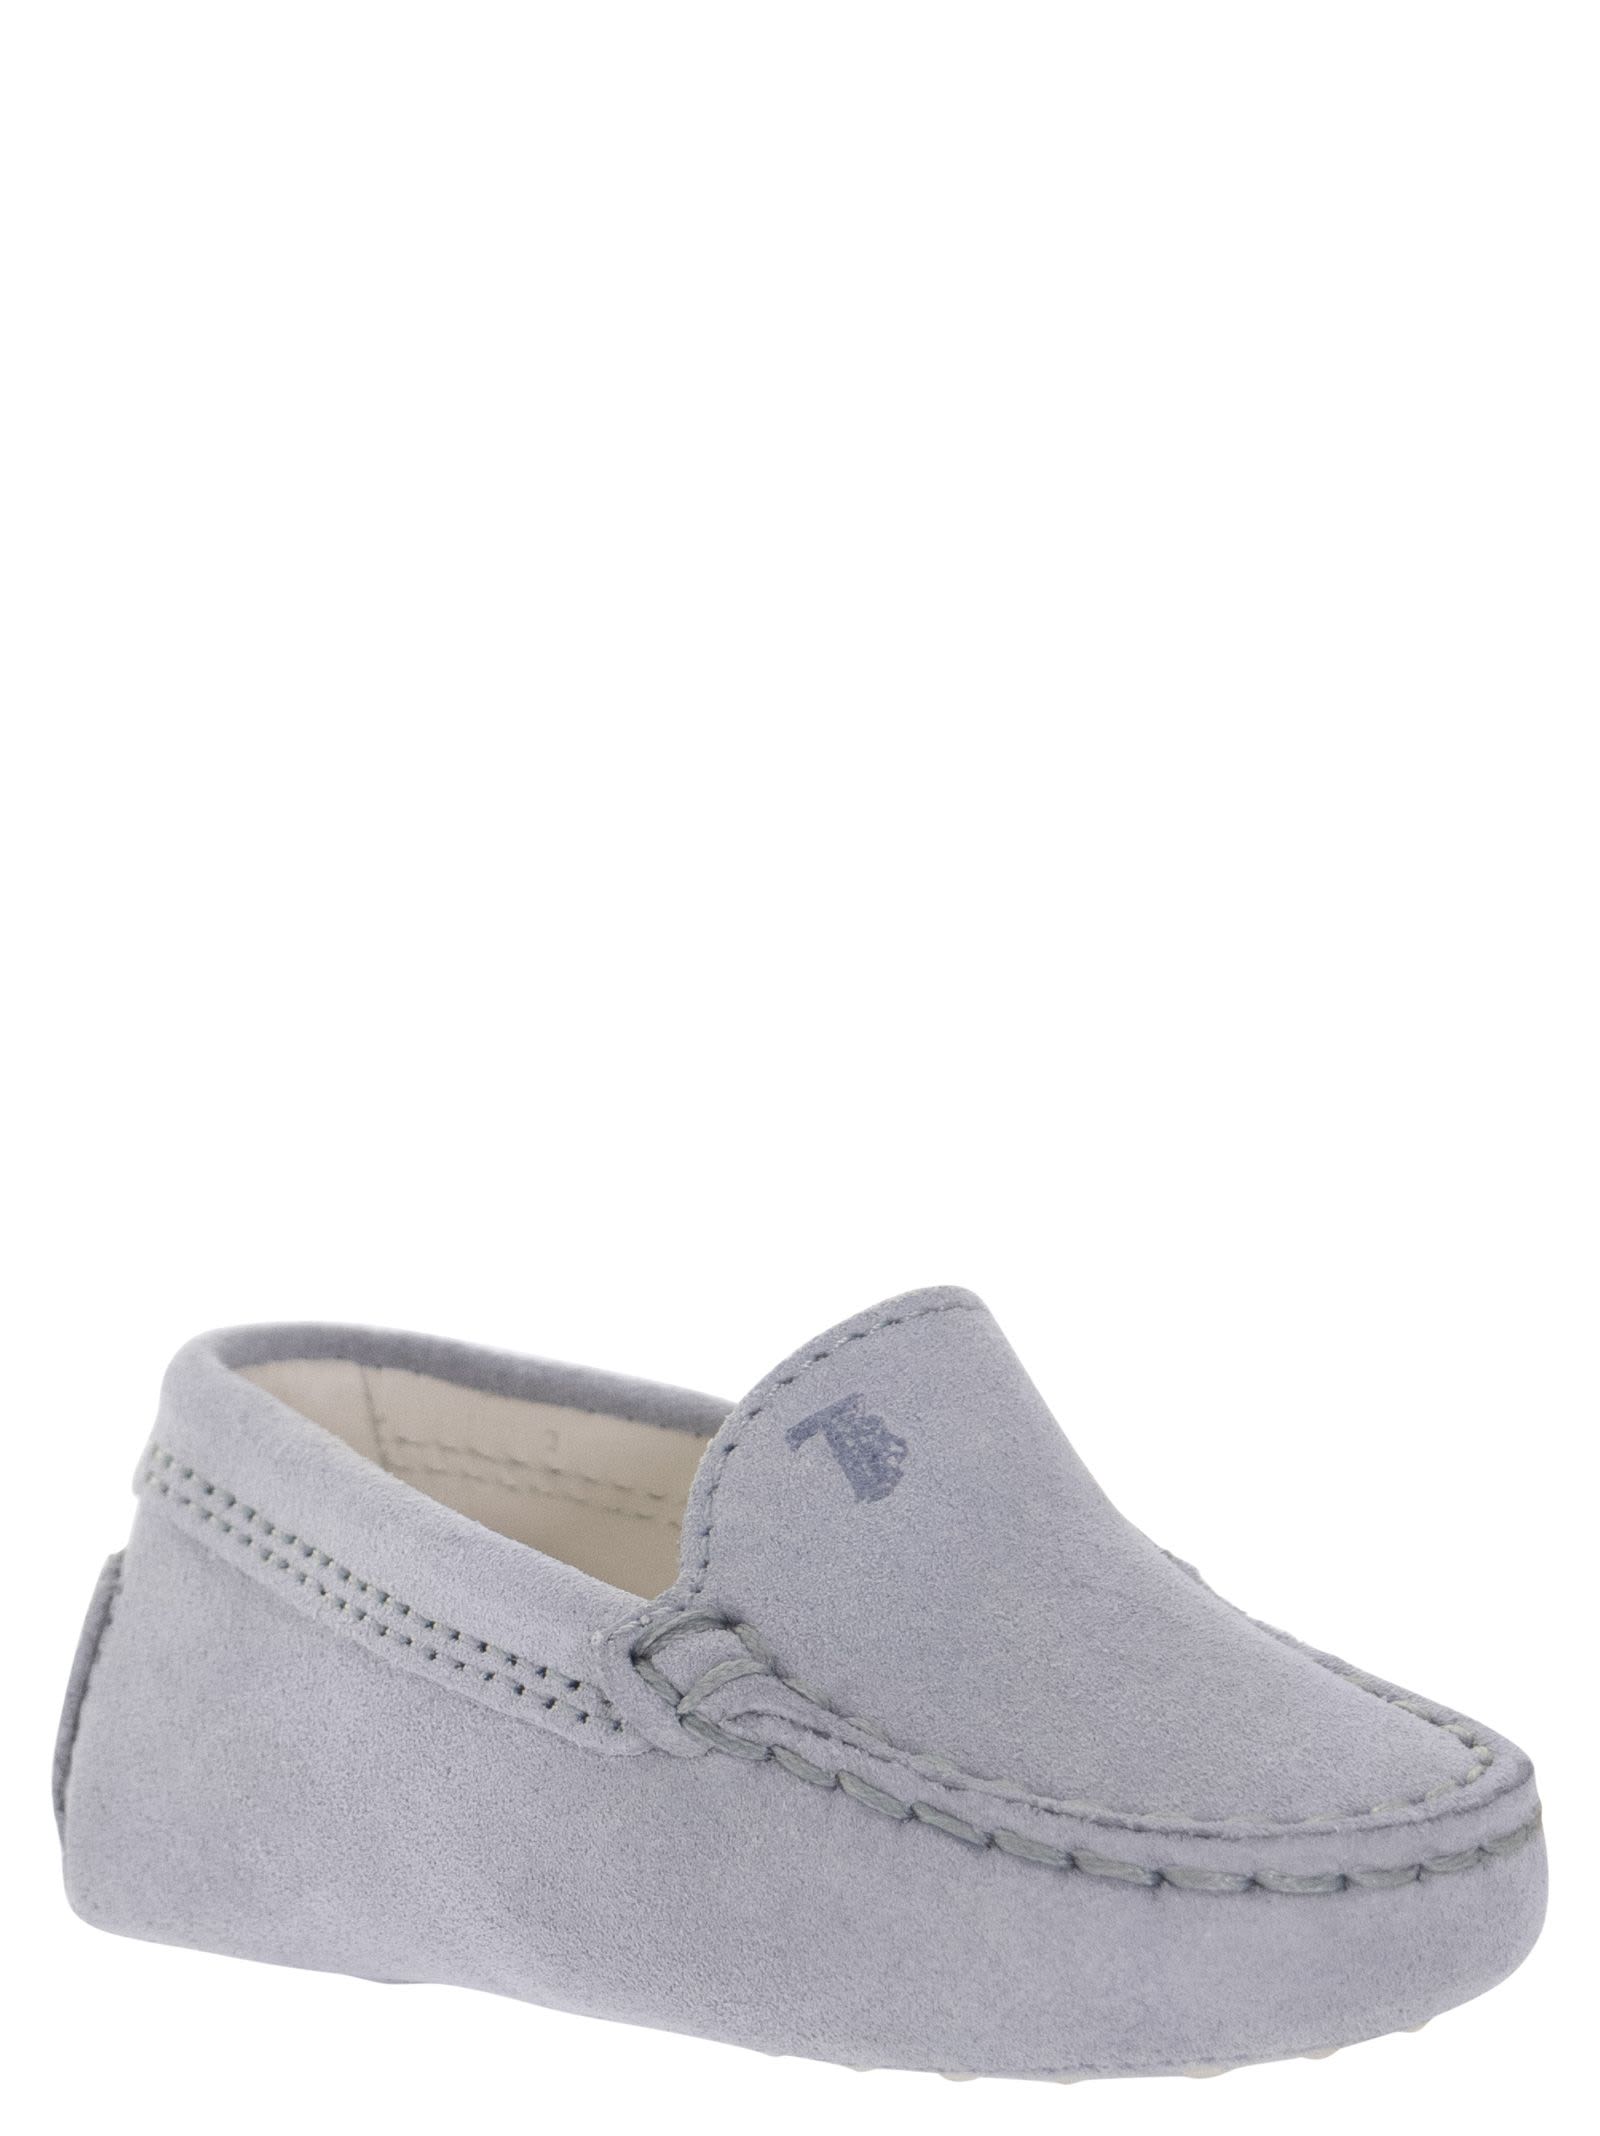 TOD'S GOMMINO SUEDE LOAFER 